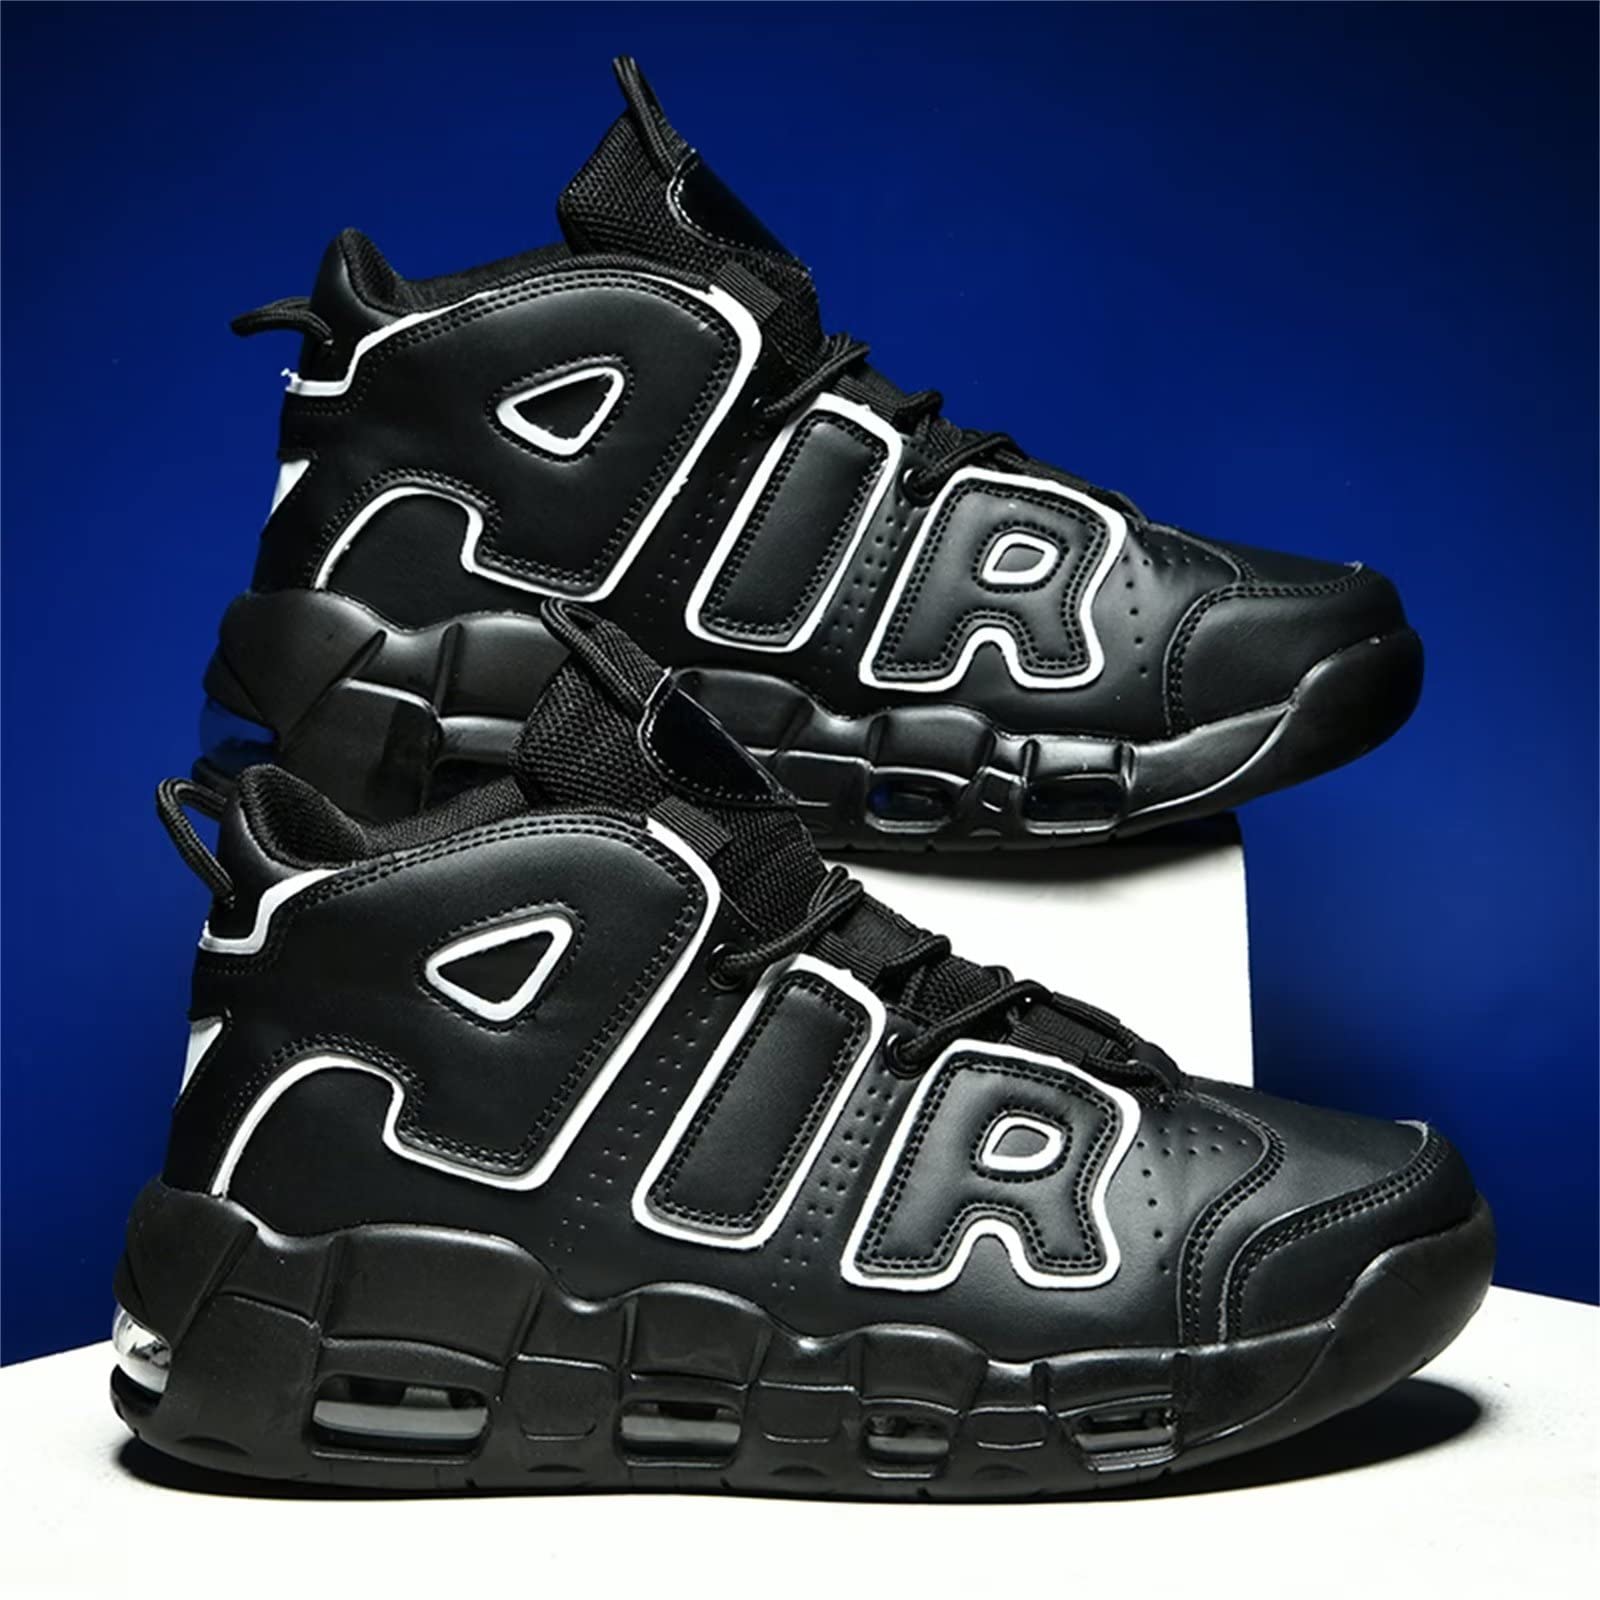 Aszeller Men's Air More Uptempo '96 Running Shoes, Sports, Athletic Shoes, Cushioned Jogging Shoes, Casual, Daily Travel, Shoes for Men